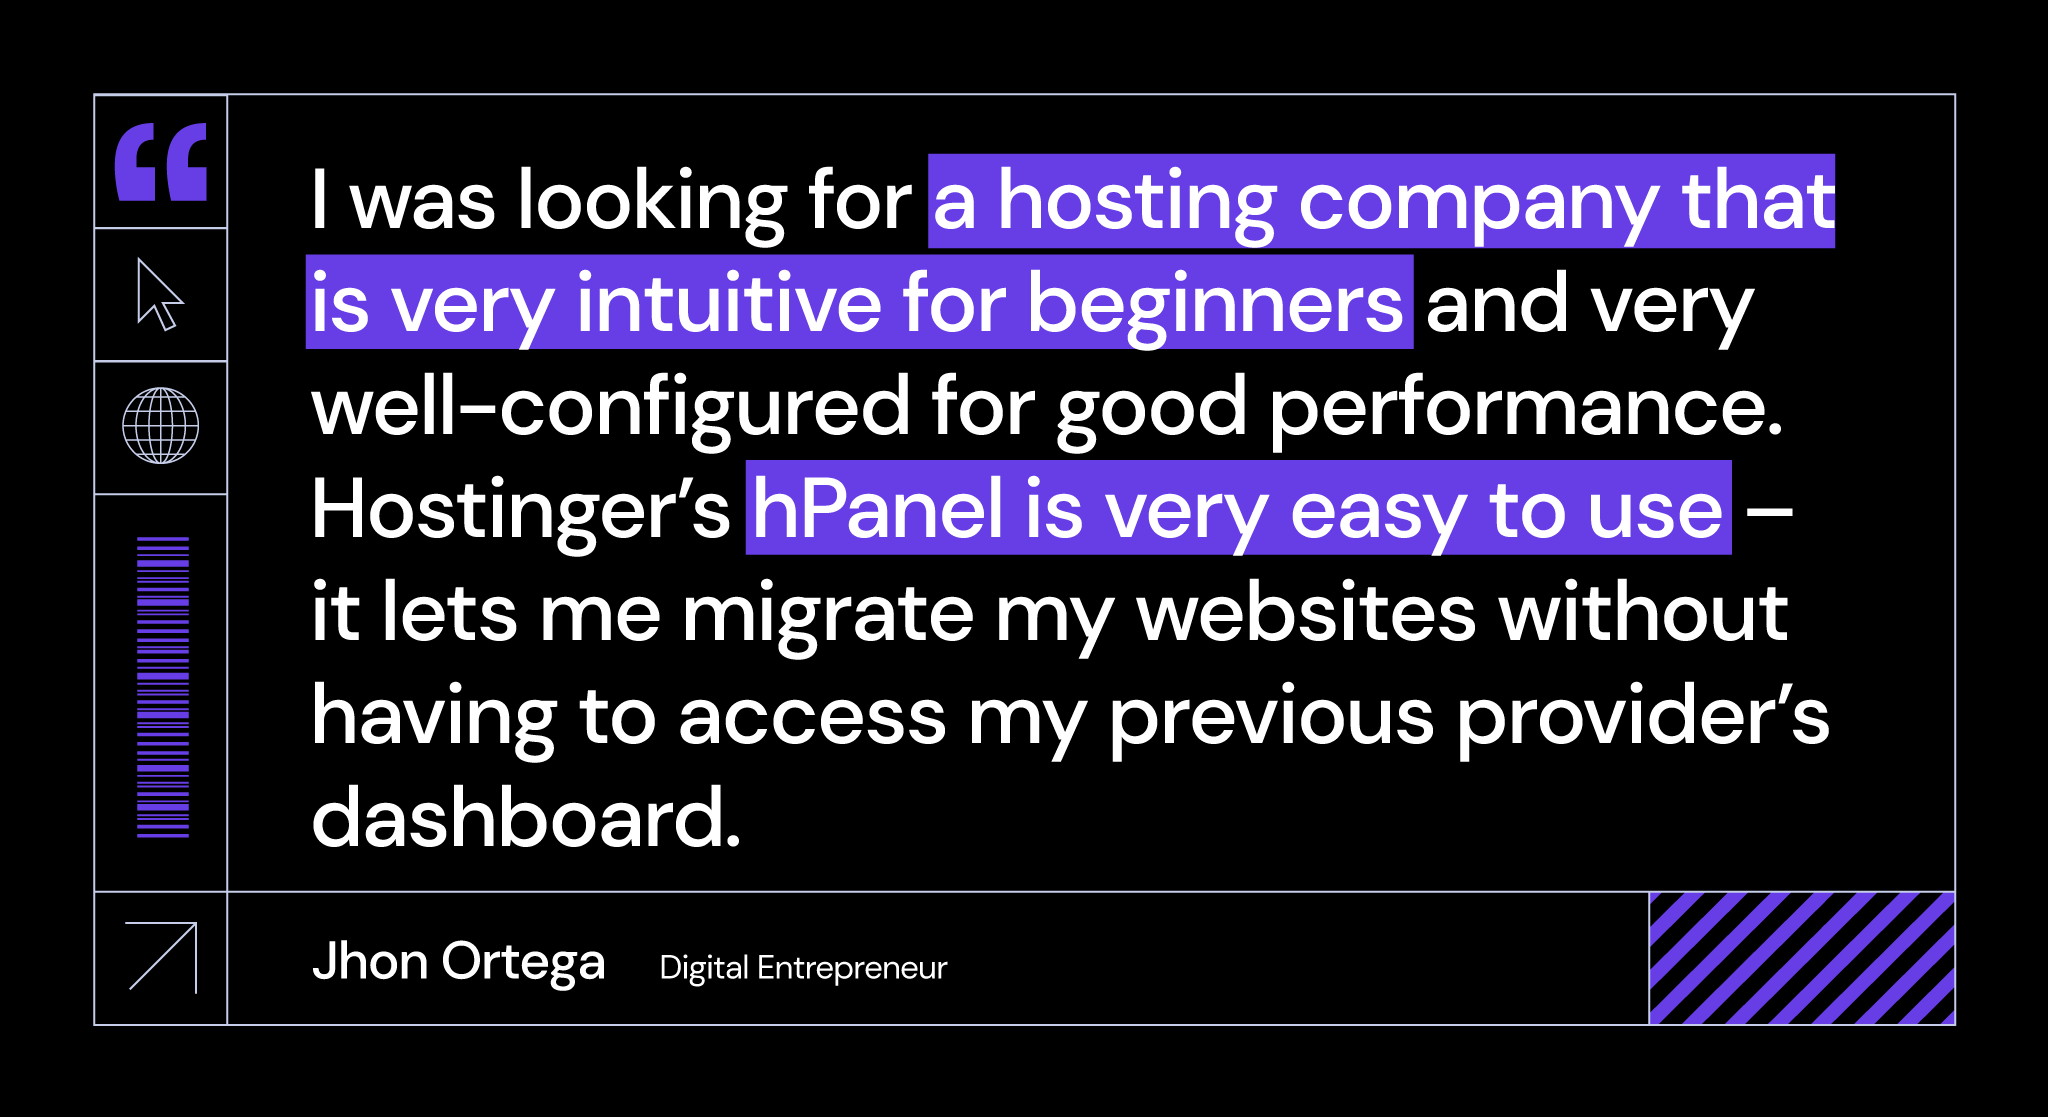 Quote by Jhon on how Hostinger's control panel is easy to use